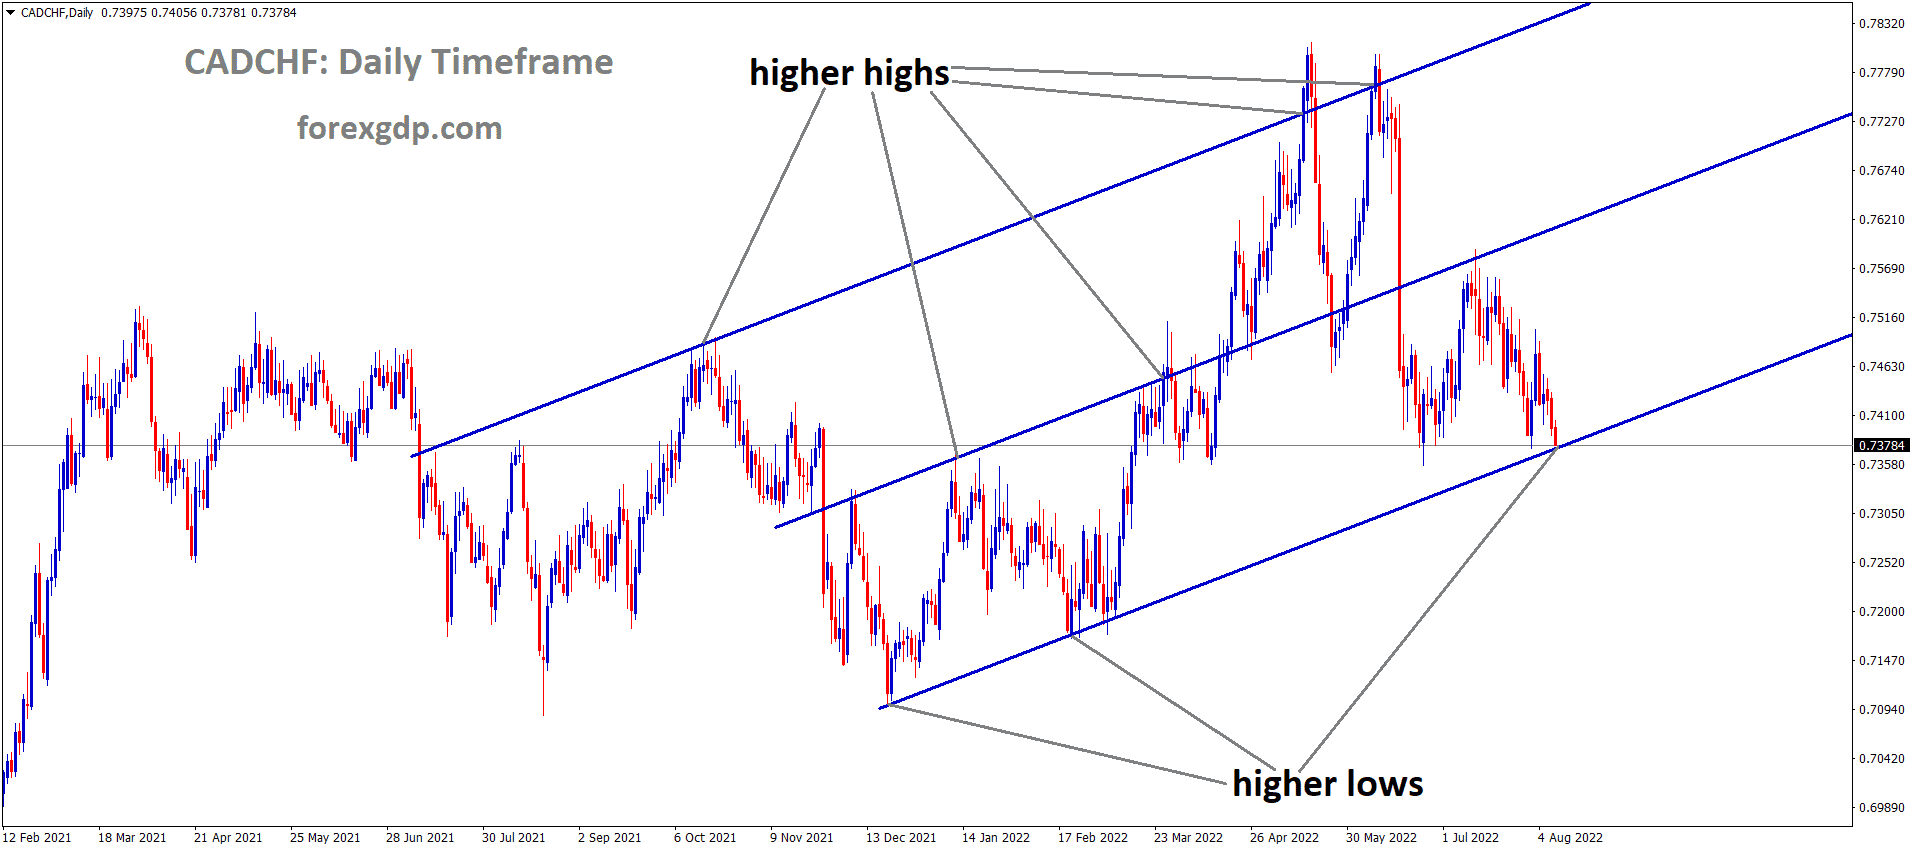 CADCHF is moving in an Ascending channel and the Market has reached the higher low area of the channel